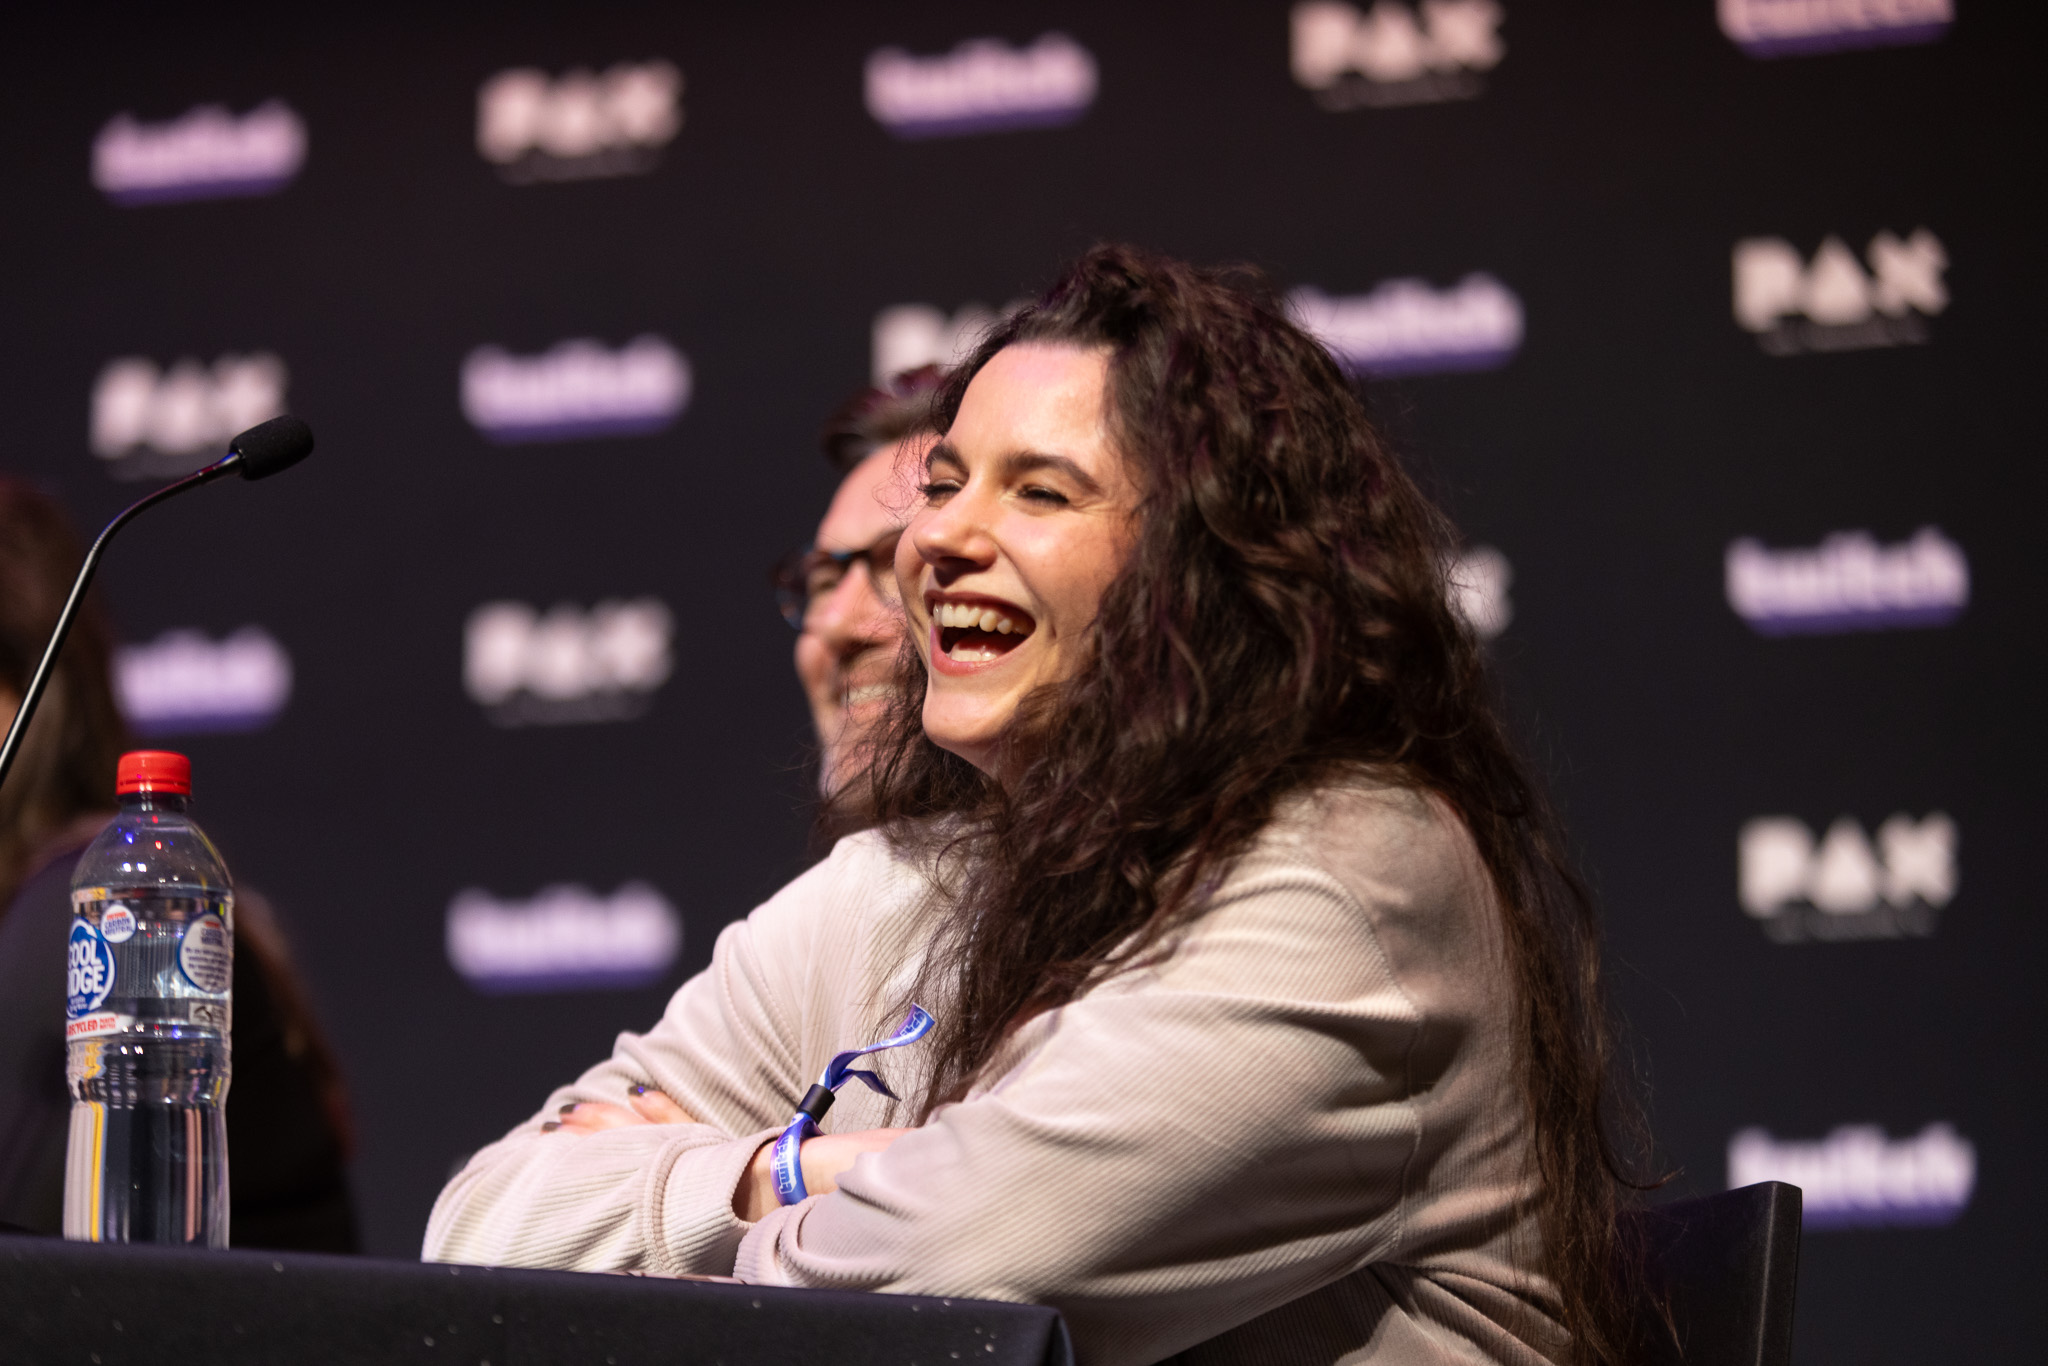 Voiceover artist laughing joyfully at a PAX Australia Panel about voice acting.